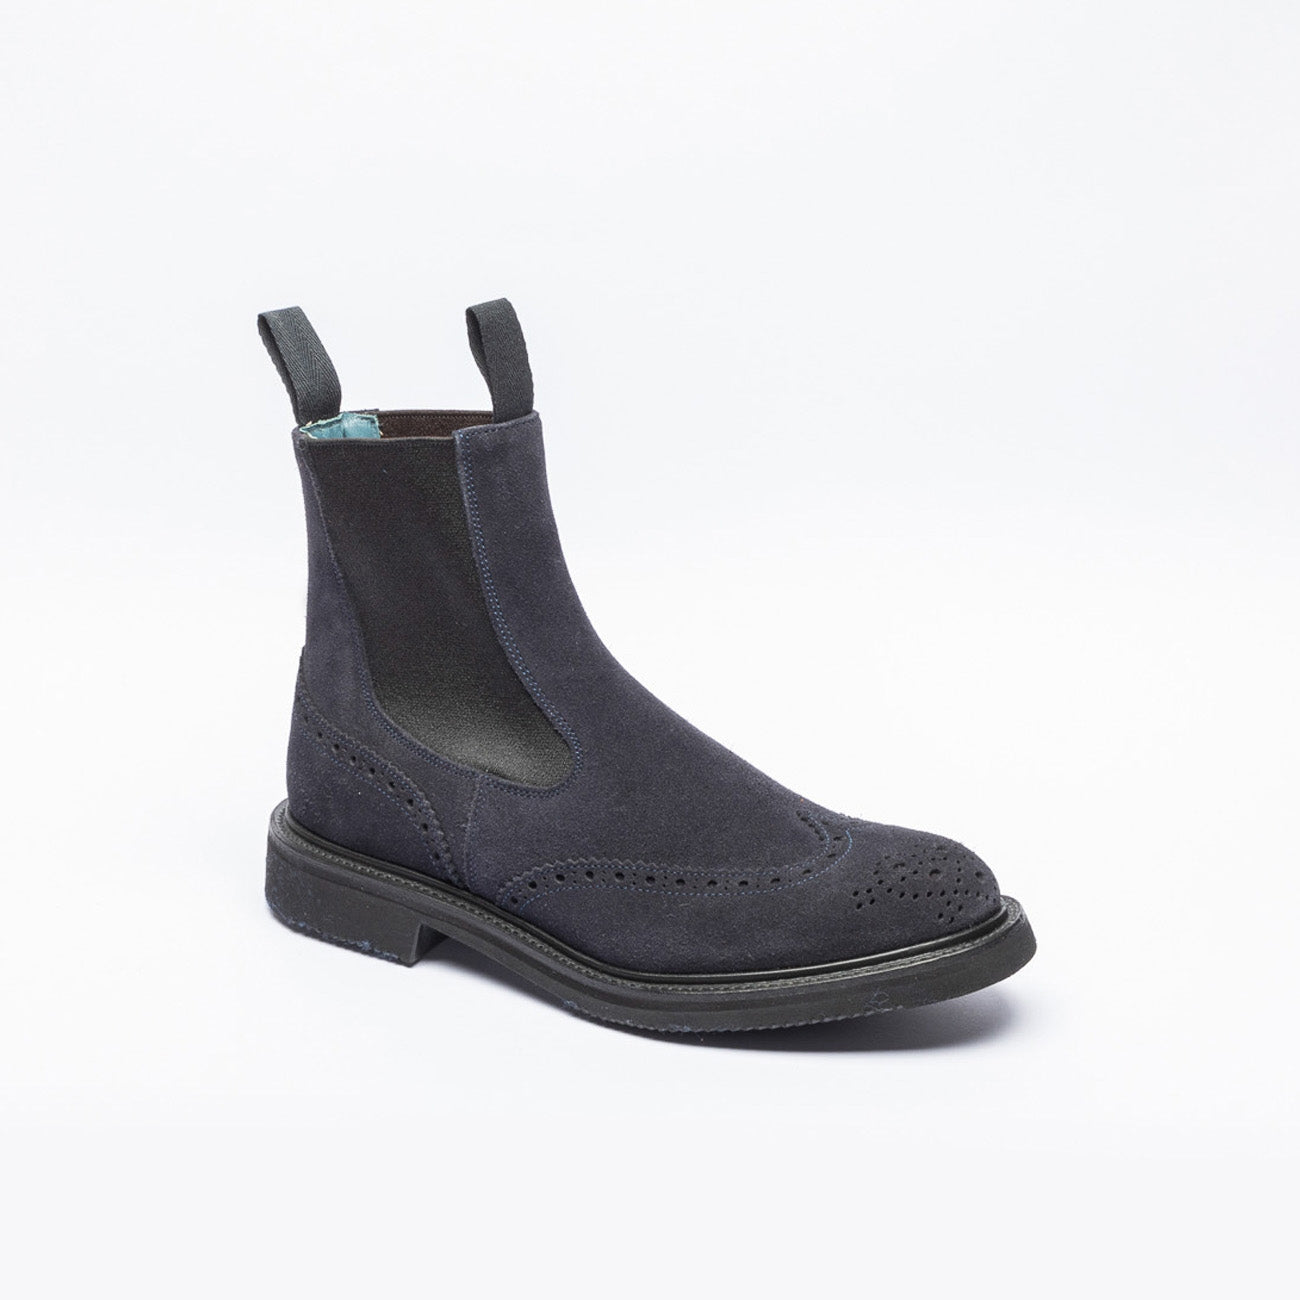 Tricker's Henry blue suede chelsea boot